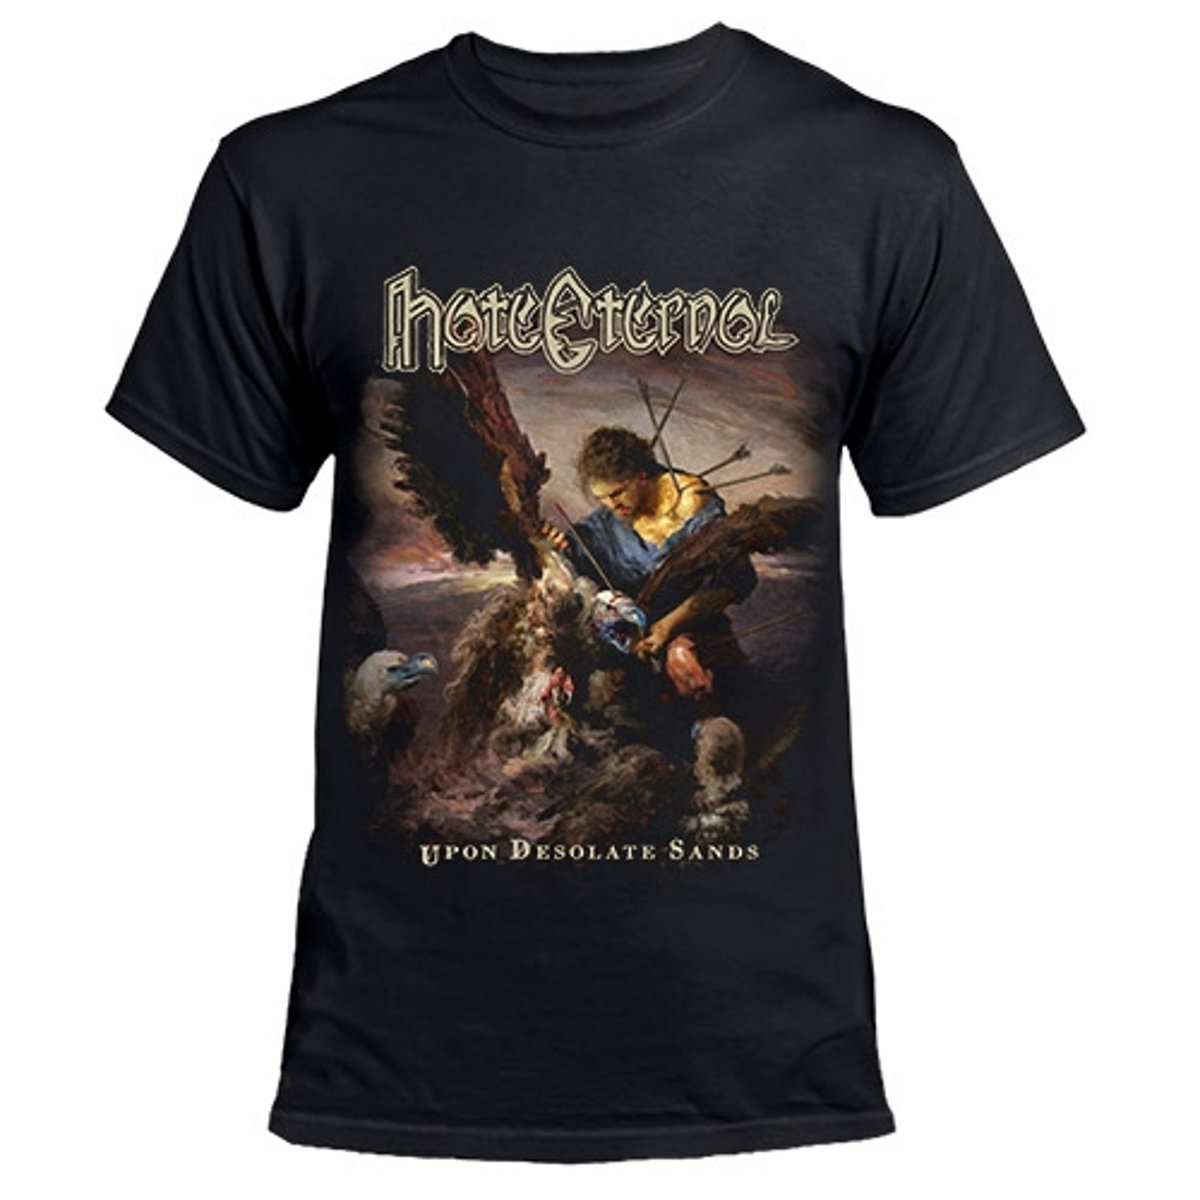 Upon Desolate Sands | Hate Eternal